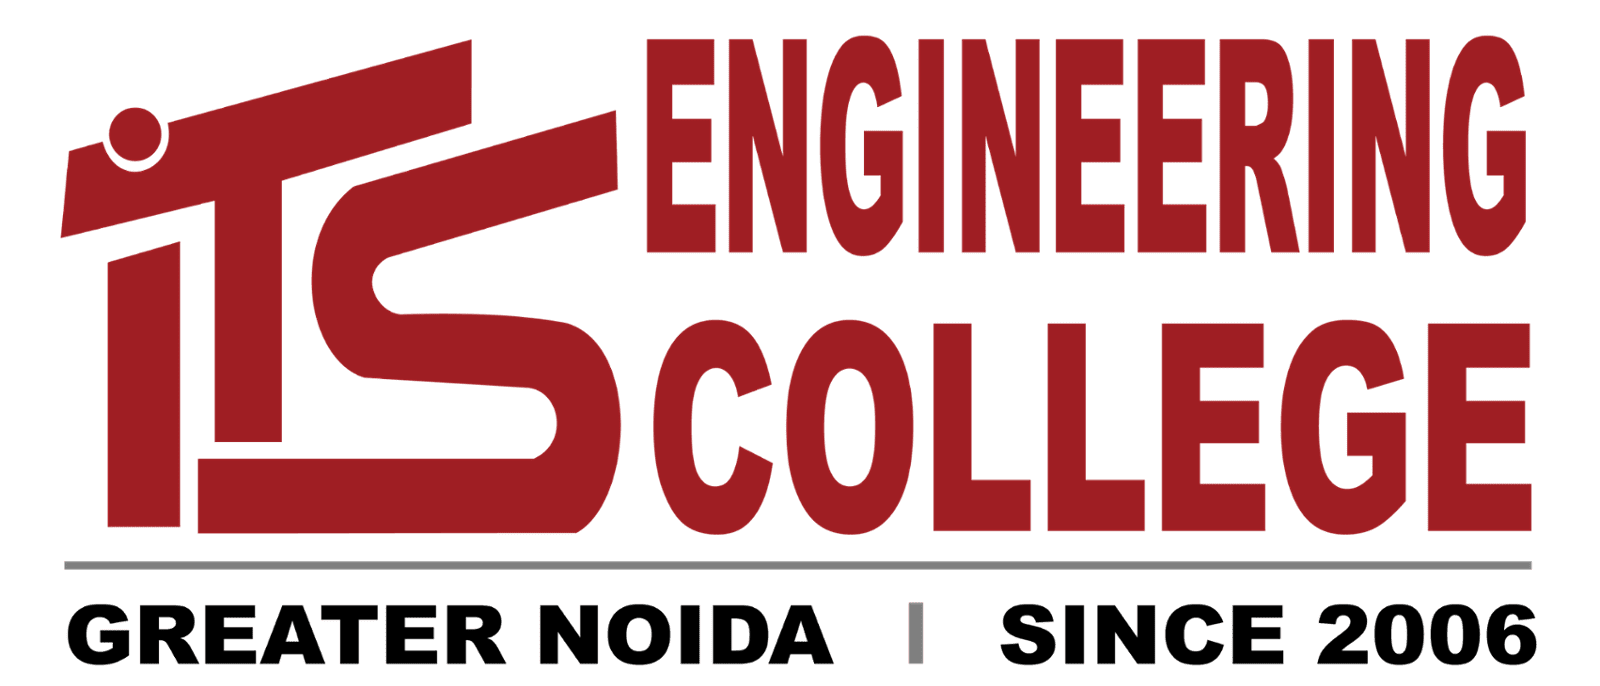 ITS ENGINEERING COLLEGE, GREATER NOIDA